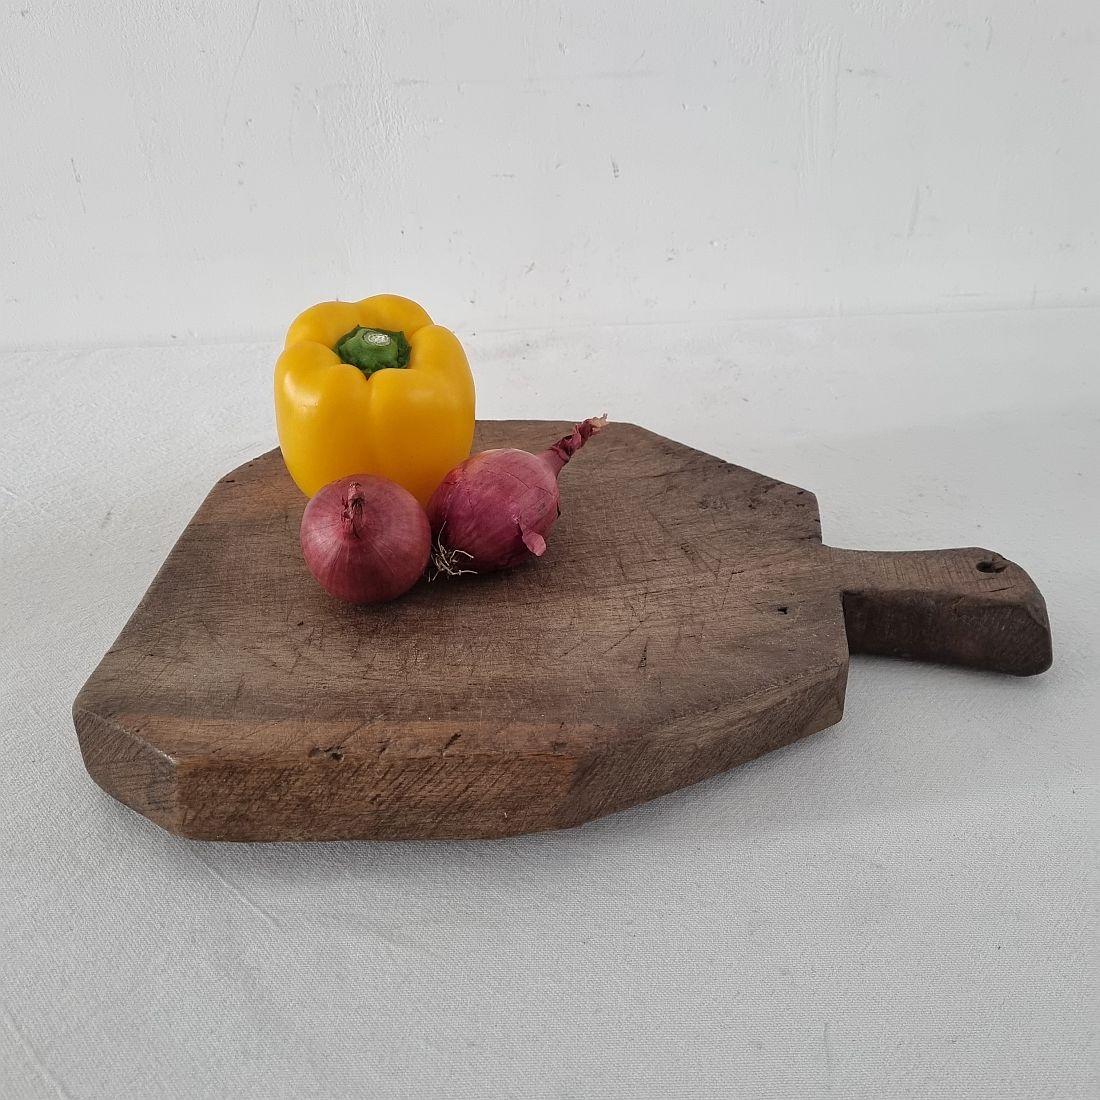 Unique wooden chopping-cutting board with a beautiful form. Great statement on your countertop,
France, circa 1850-1900
Weathered. If needed items are treated against woodworm.